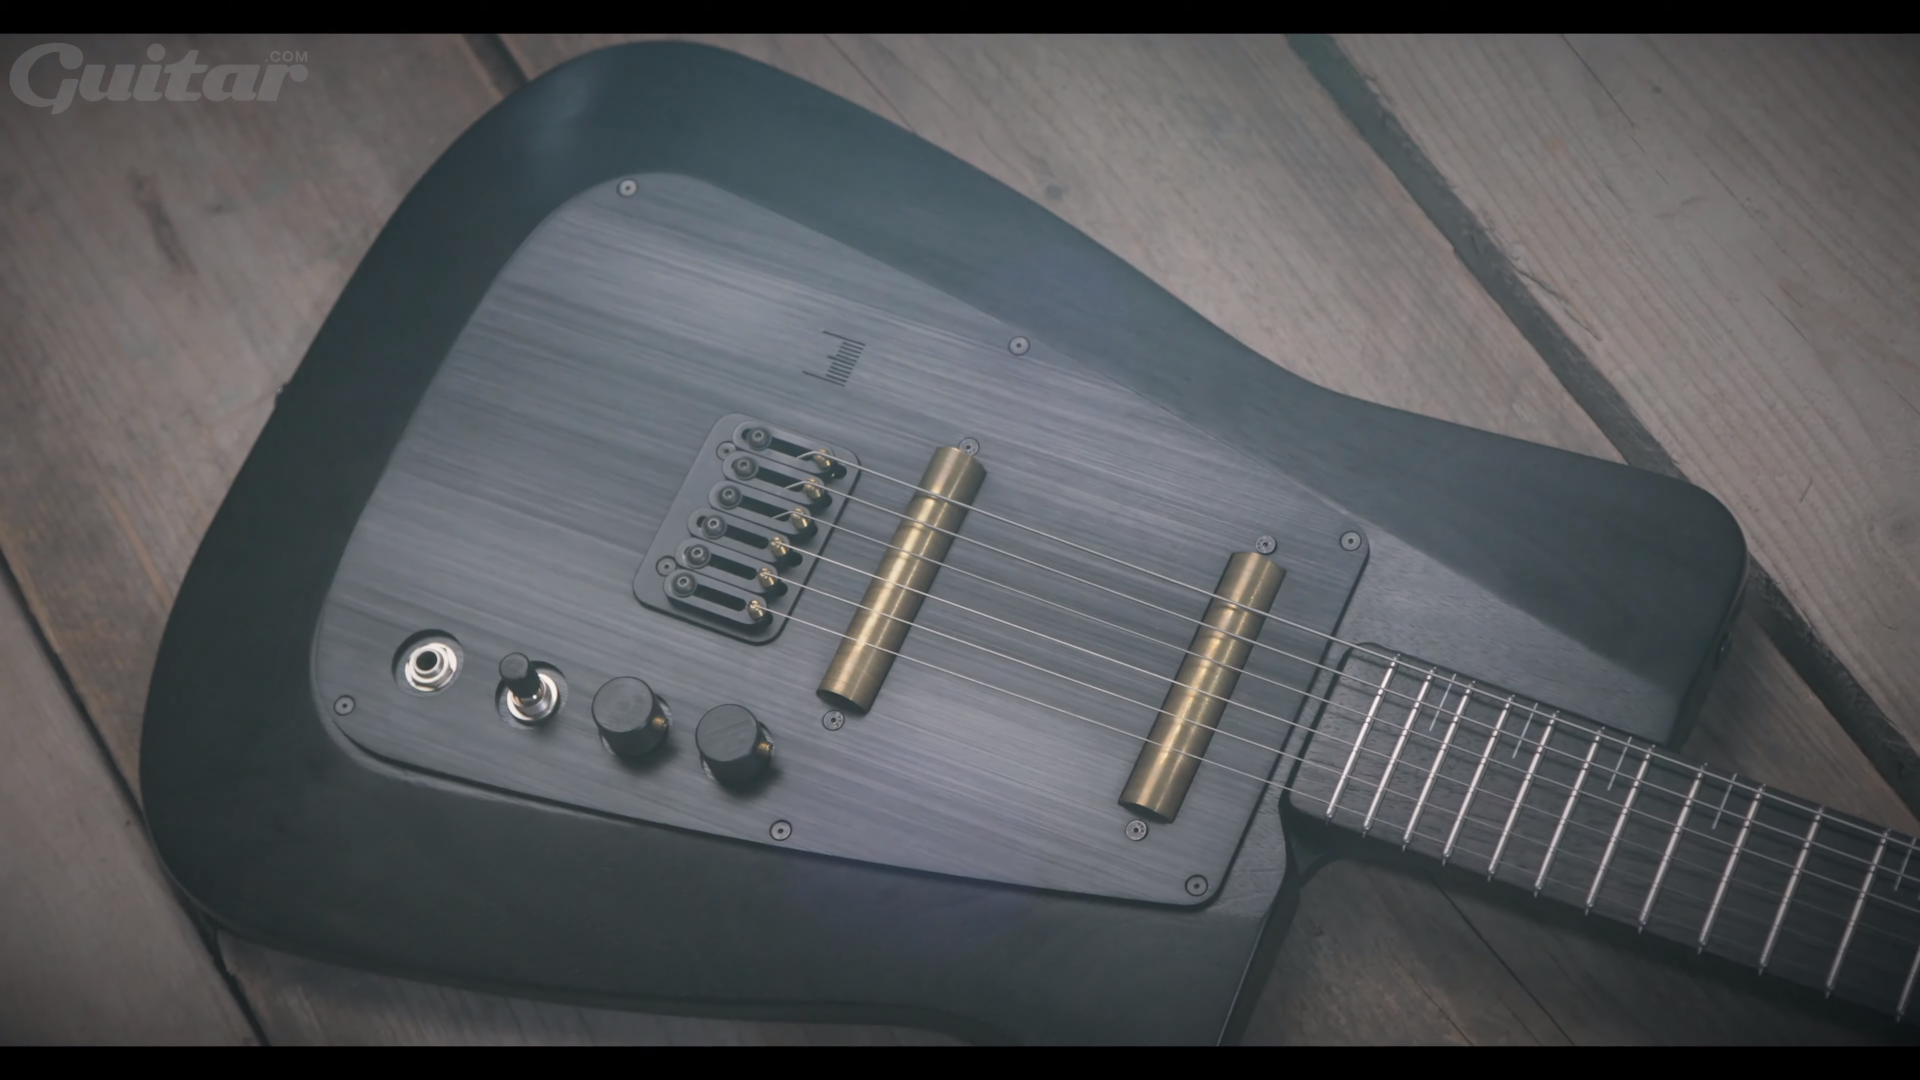 Guitar Magazine video demo of our Millimetric Instruments MGS2!